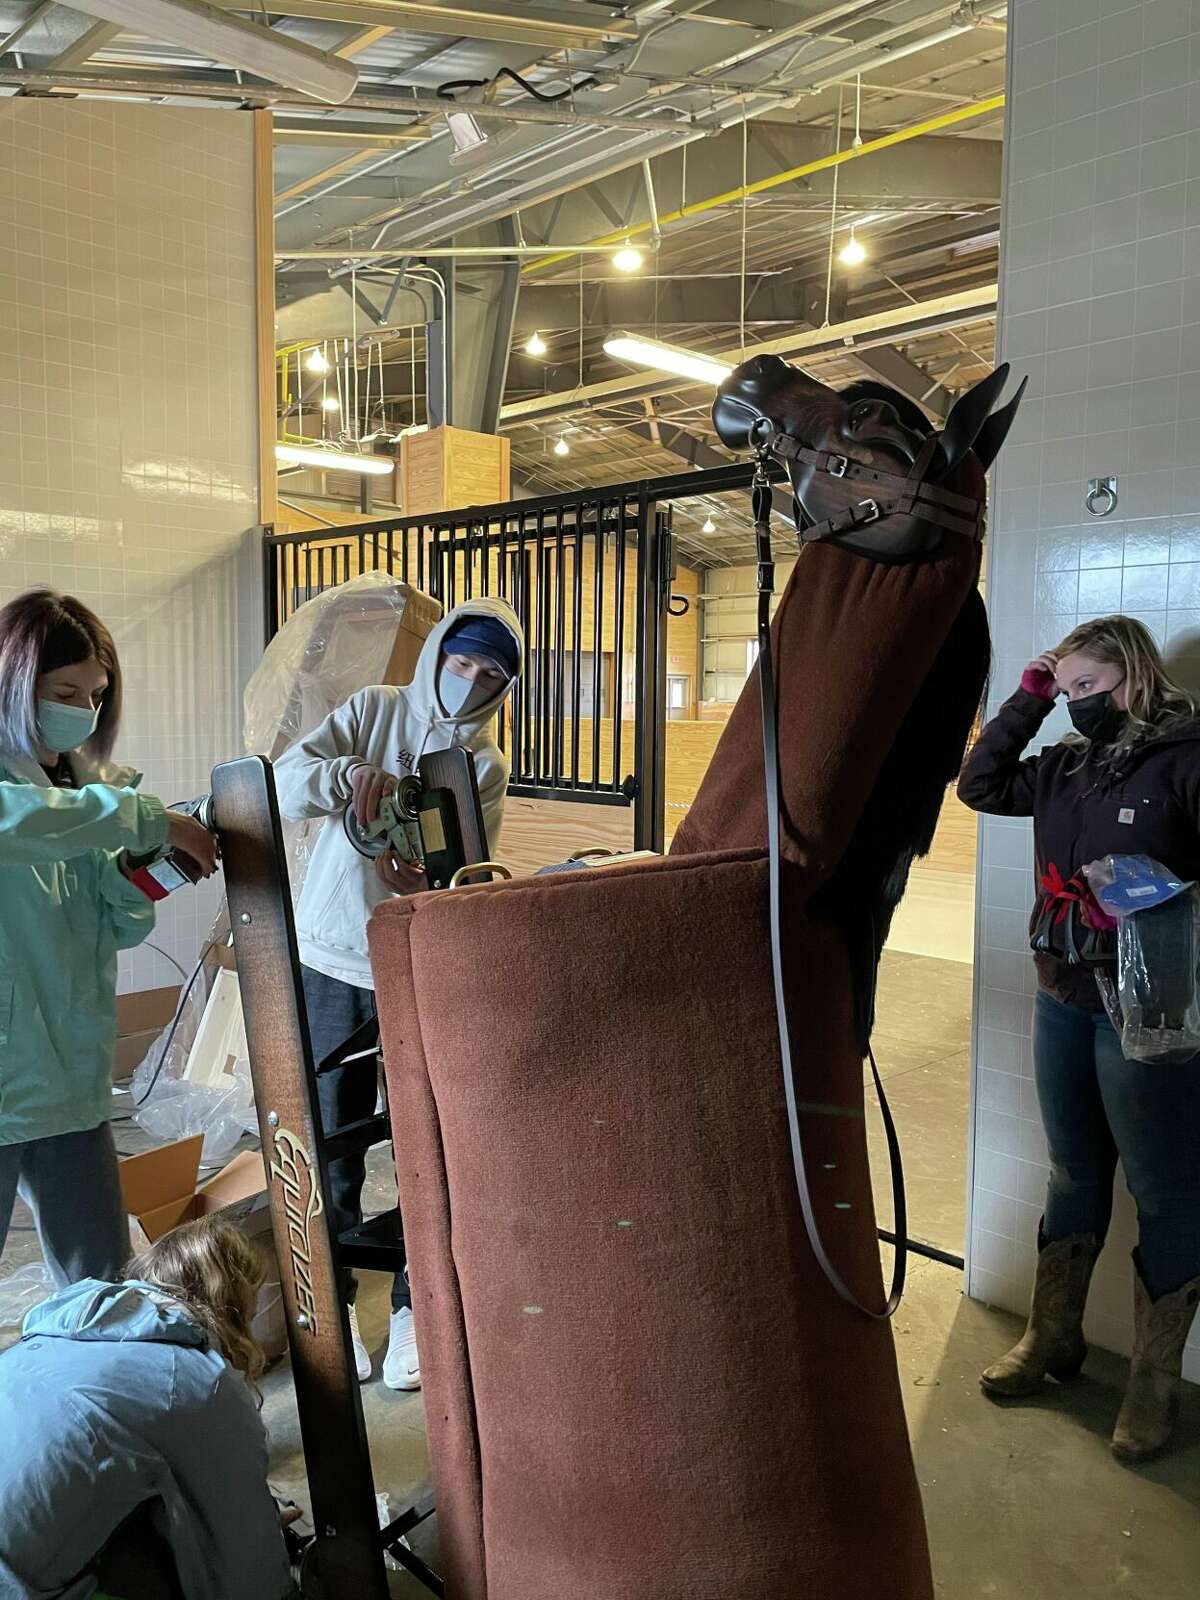 Students grooming Maverick, the mechanical horse